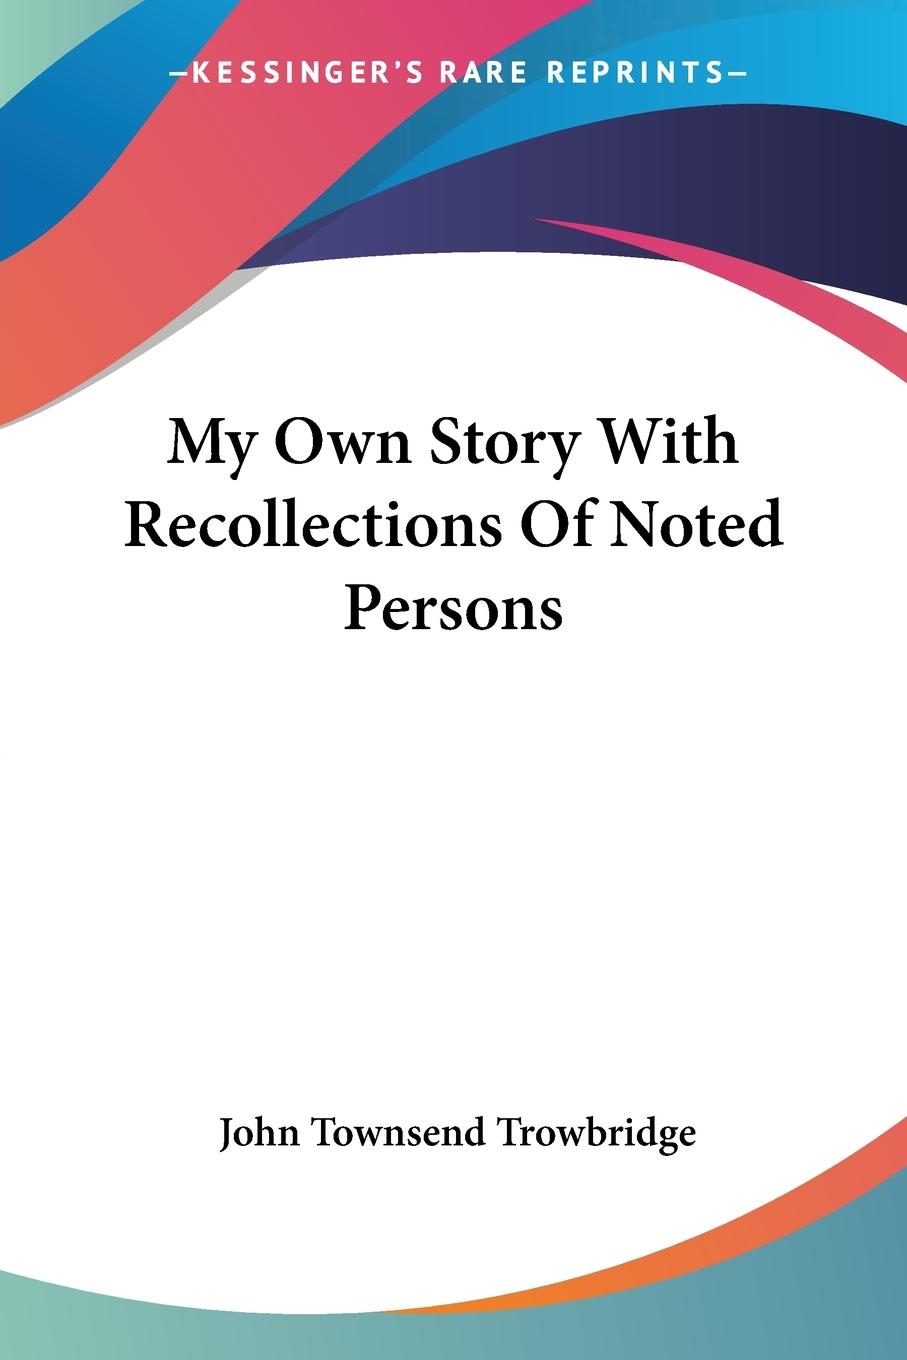 My Own Story With Recollections Of Noted Persons - Trowbridge, John Townsend